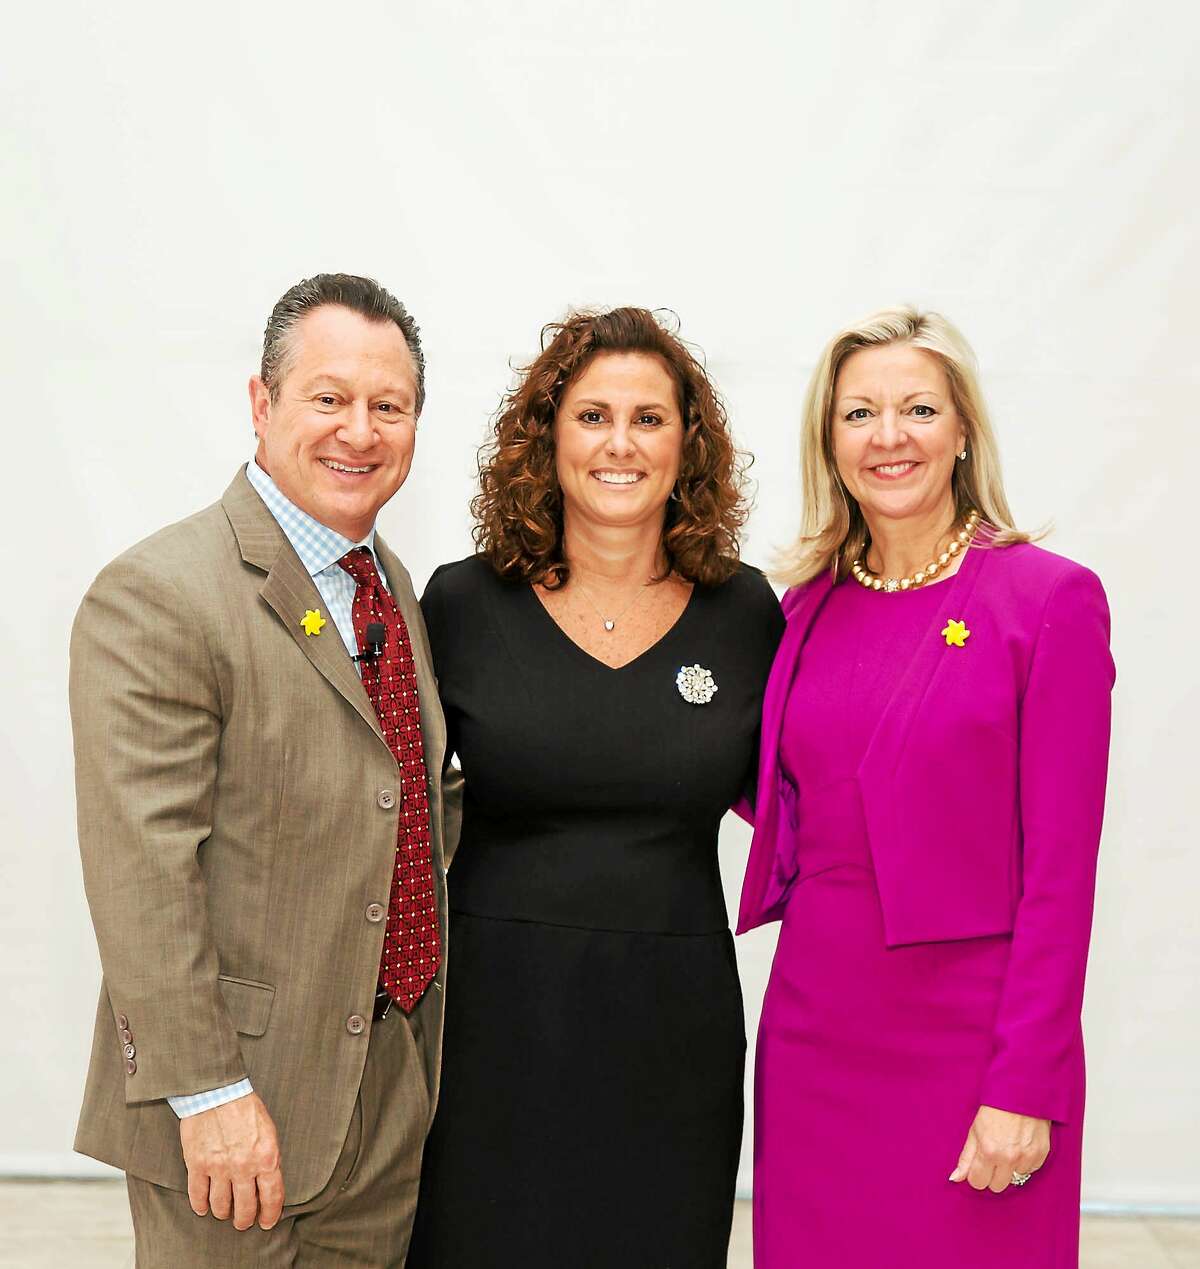 From left, Gino Blefari joins top producer Julianne Ward, who was honored by Berkshire Hathaway HomeServices New England Properties' CEO and president Candace Adams at the company's recent breakfast event.